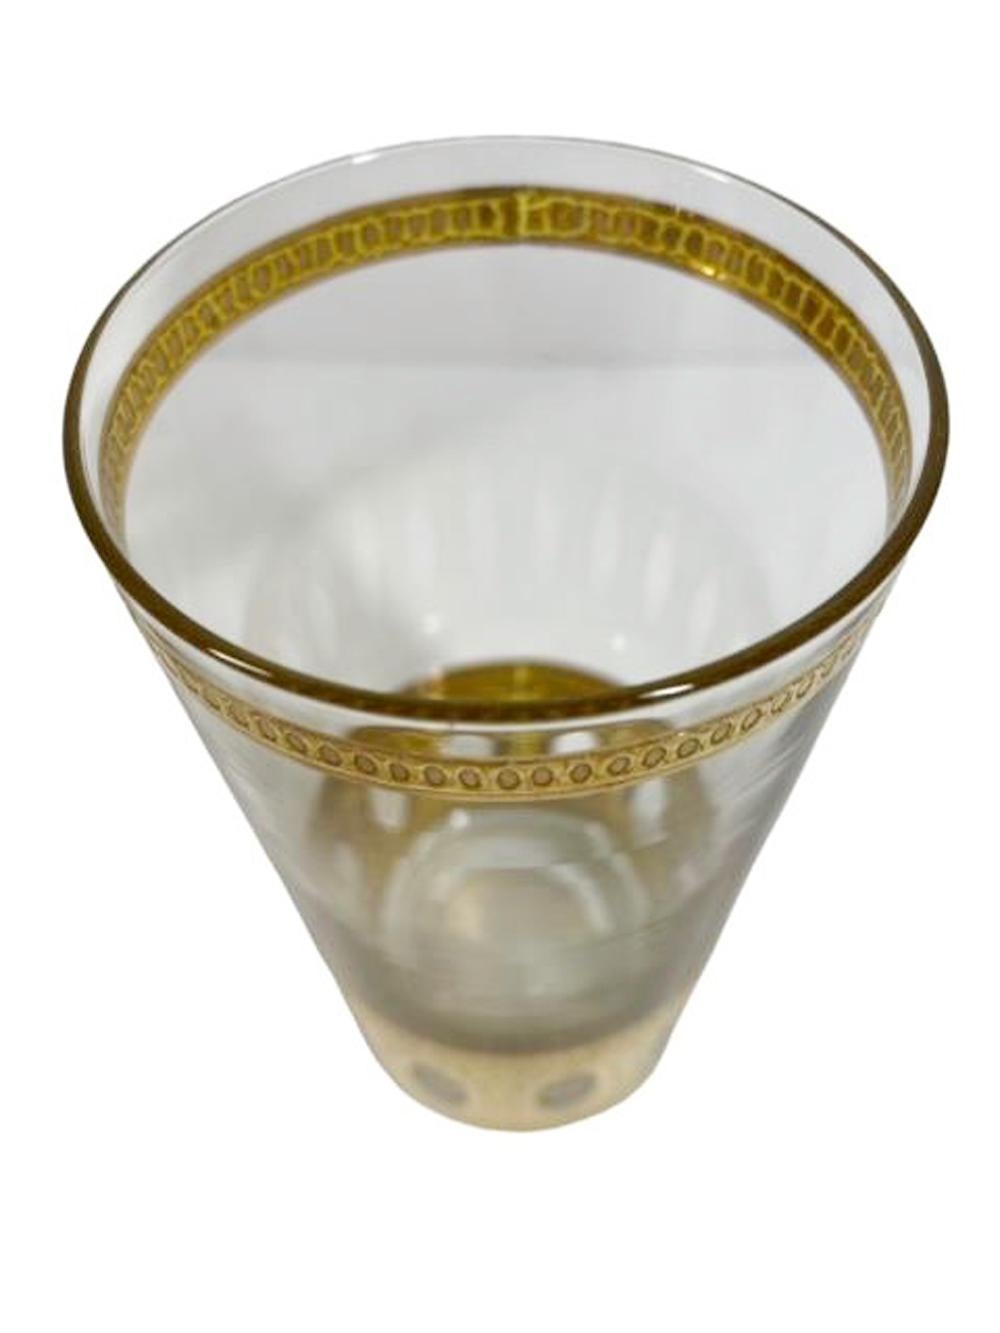 Set of 6 Culver, LTD. highball glasses in the 